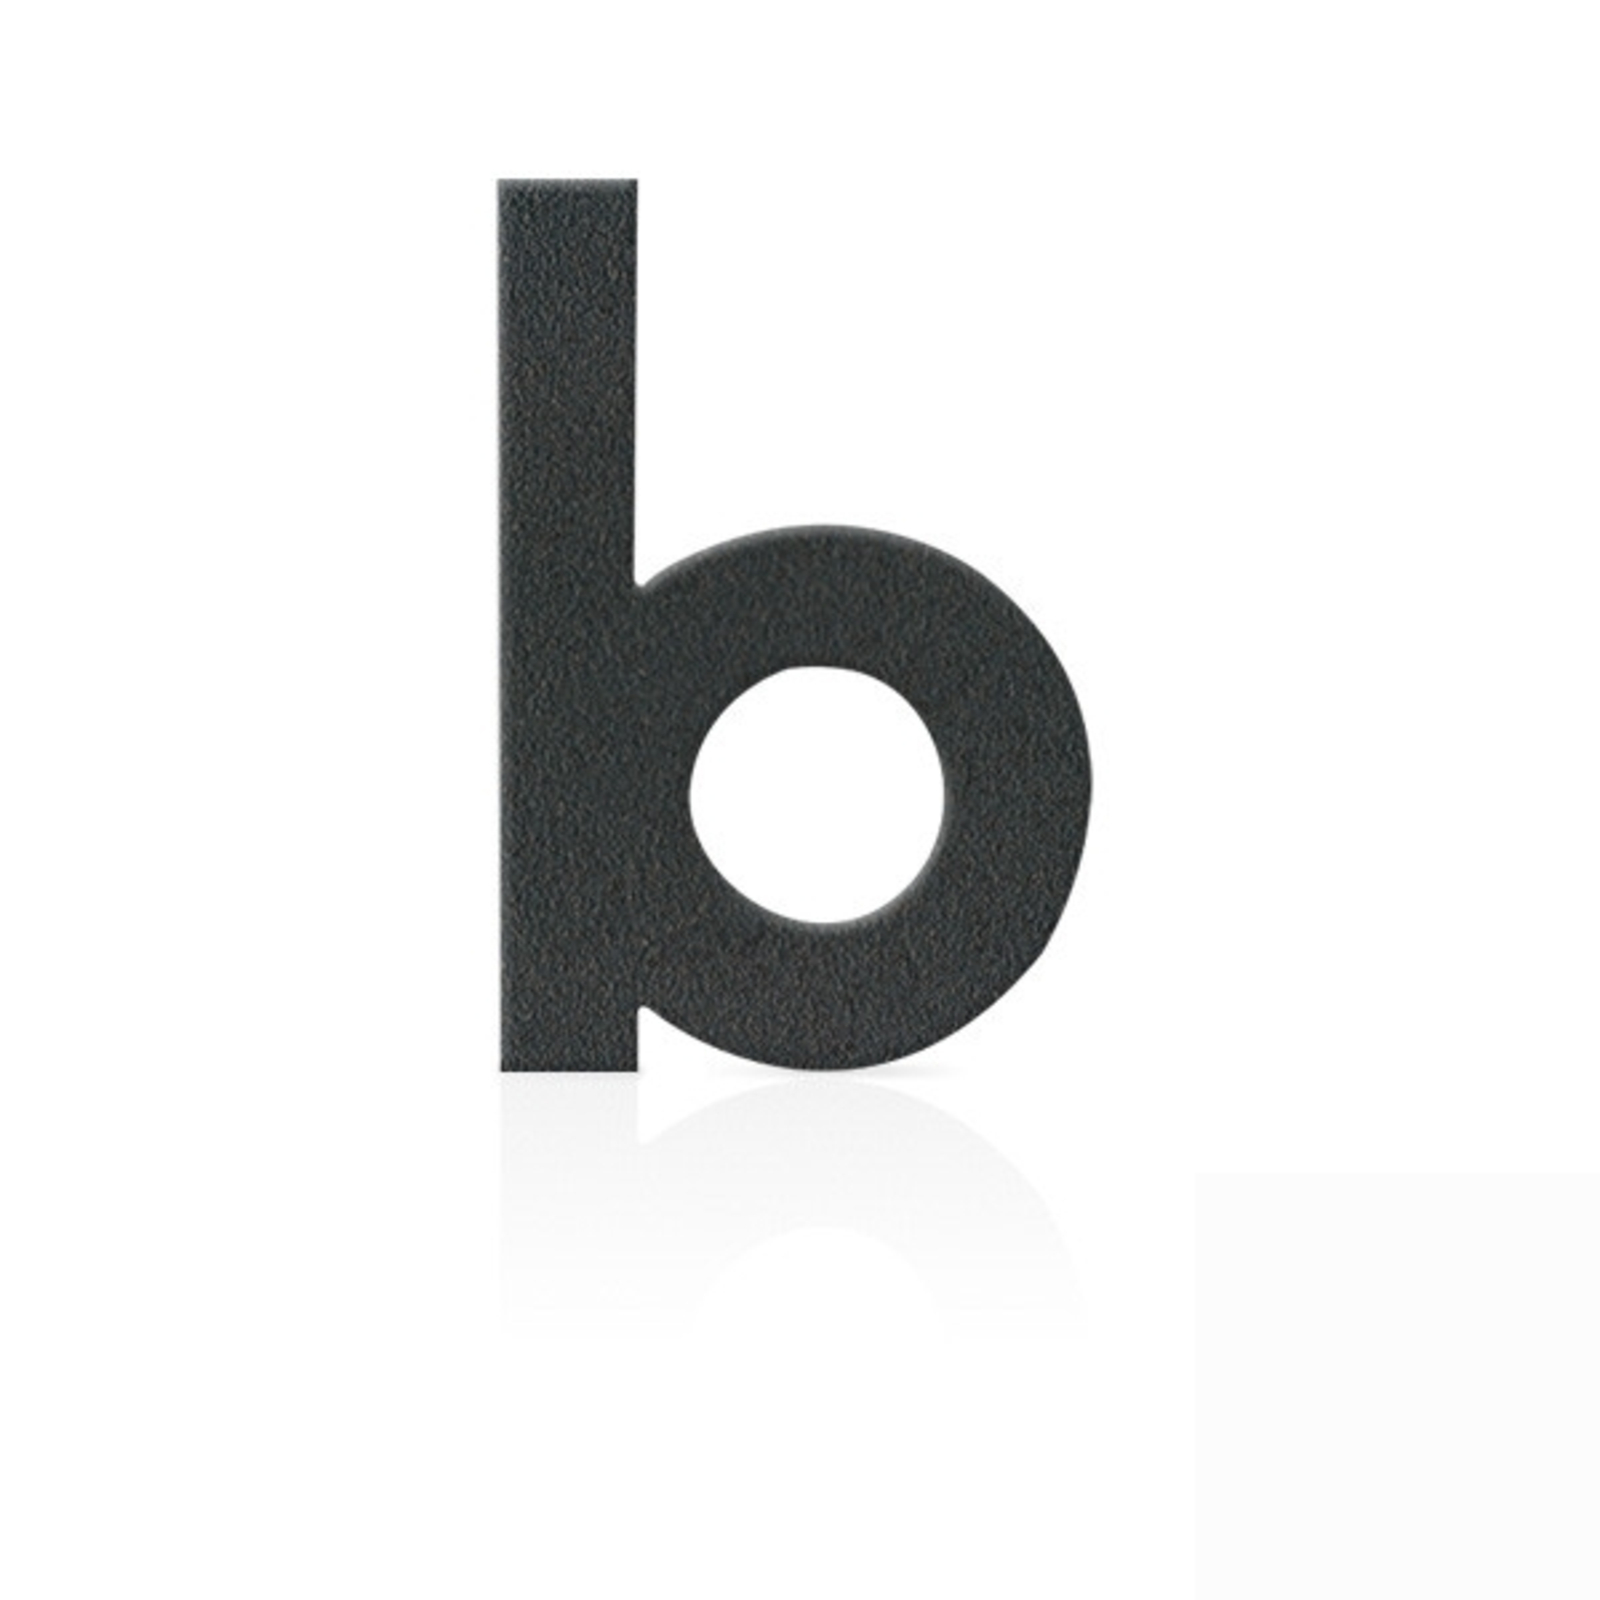 Stainless steel numbers, letter b, graphite grey